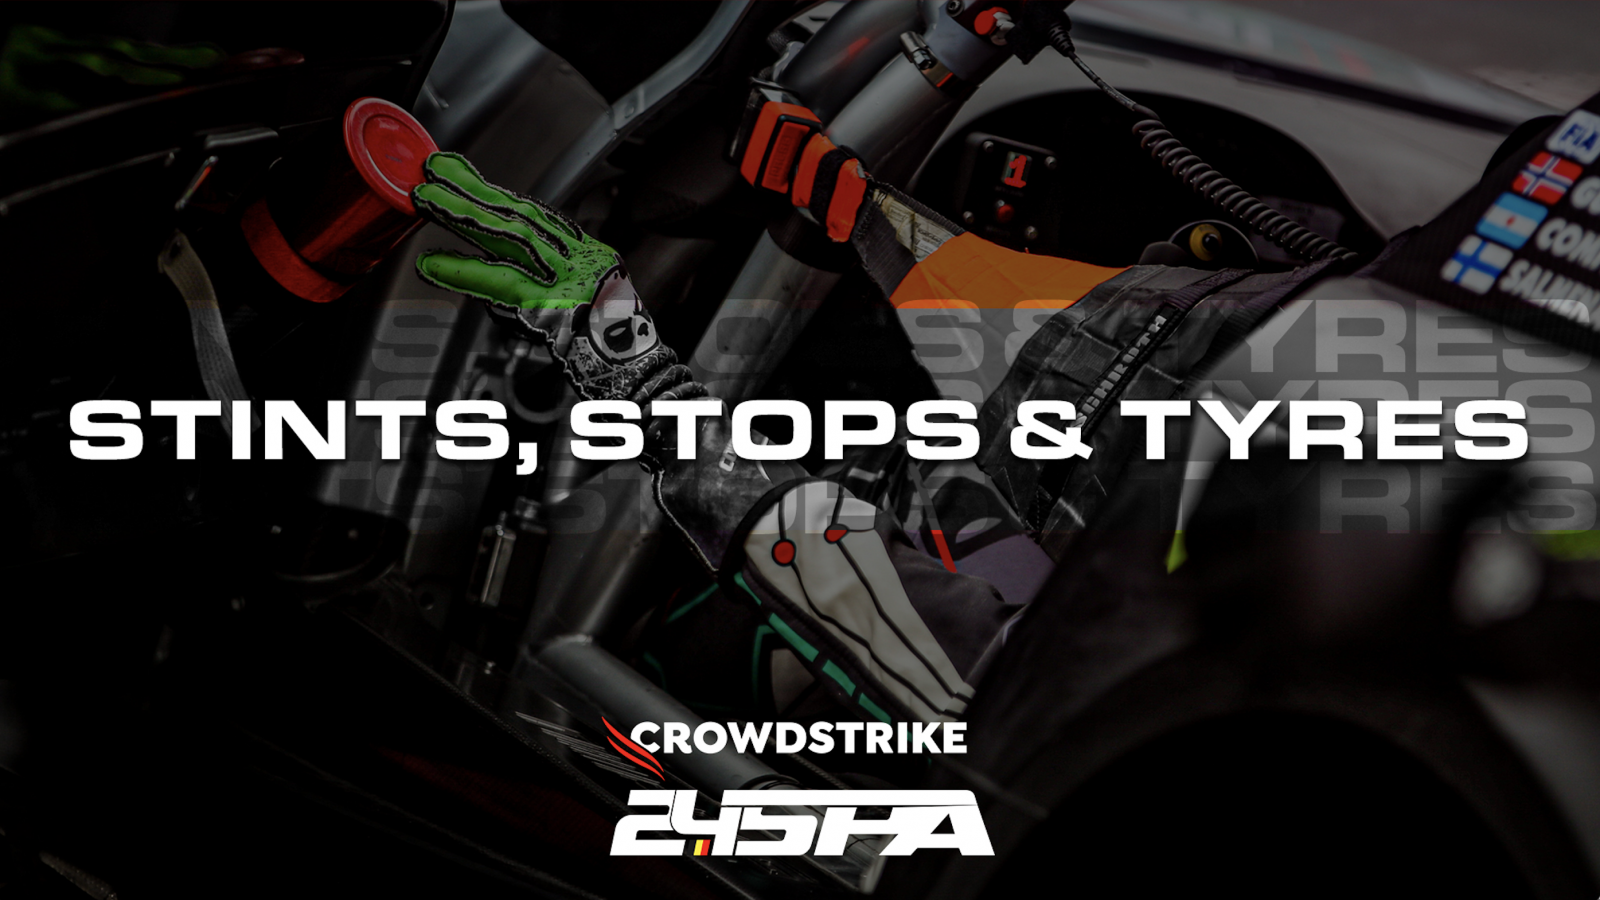 Everything you need to know about the 2023 CrowdStrike 24 Hours of Spa: Stints, Stops & Tyres